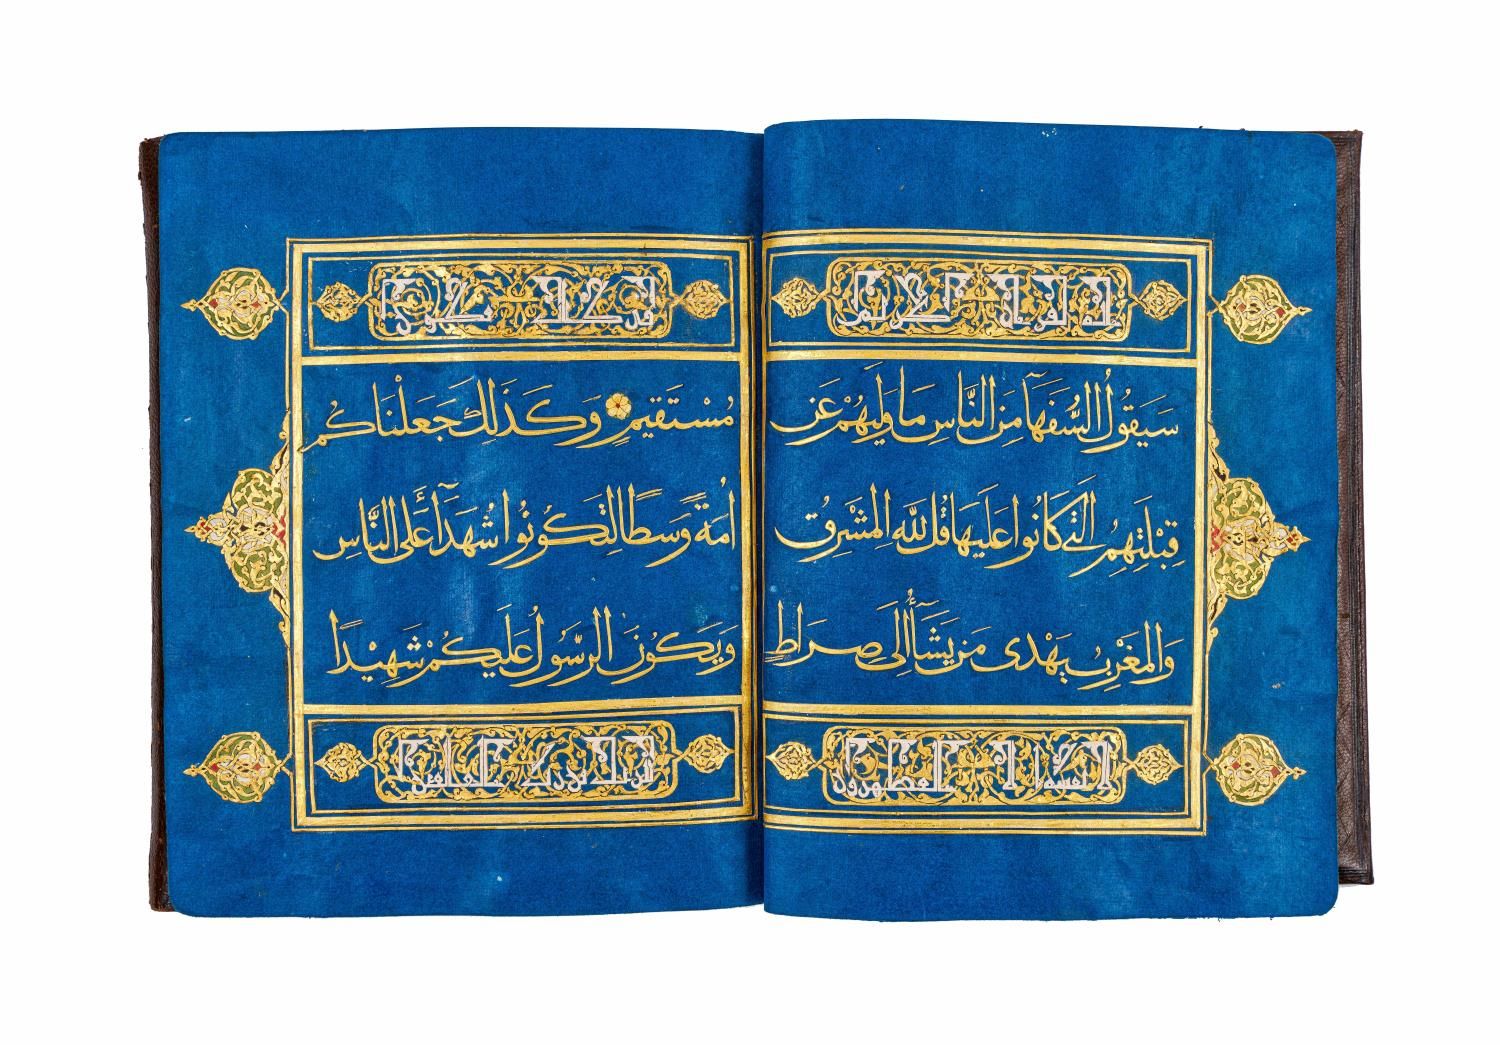 A BLUE QURAN SECTION WITH GOLD CALLIGRAPHY, 19TH/20TH CENTURY 带金色书法的蓝色《古兰经》断面，19&hellip;